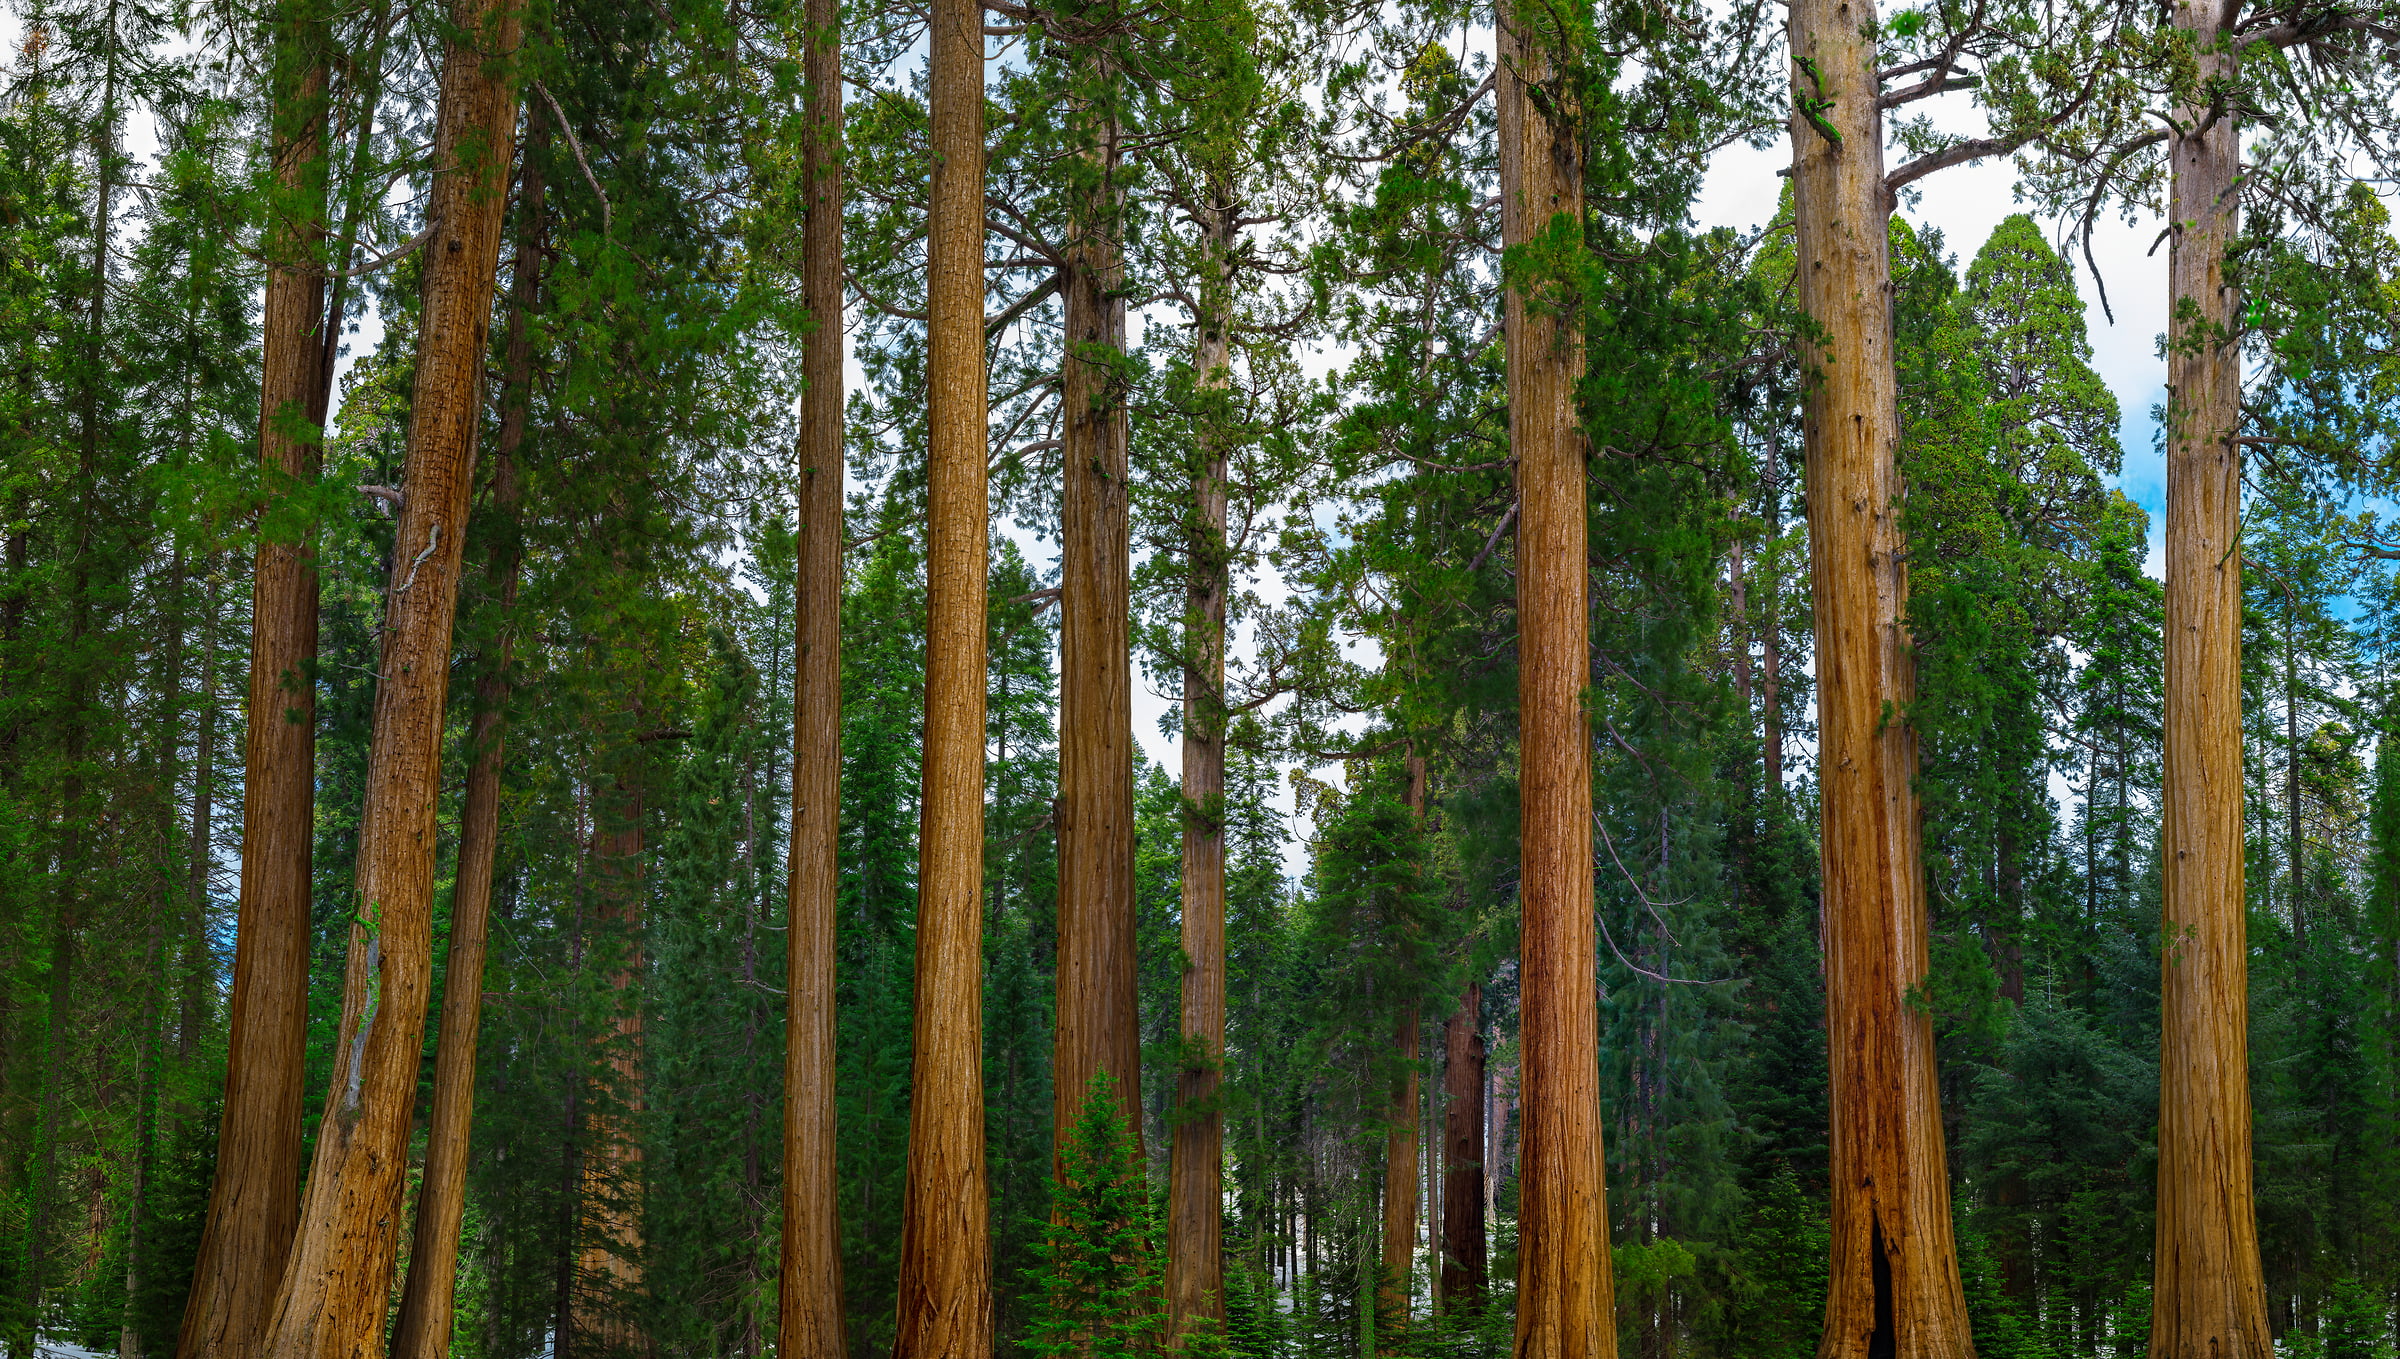 1,051 megapixels! A very high resolution, large-format VAST photo backdrop of trees; nature photograph created by Chris Collacott in Sequoia National Park, California, USA.